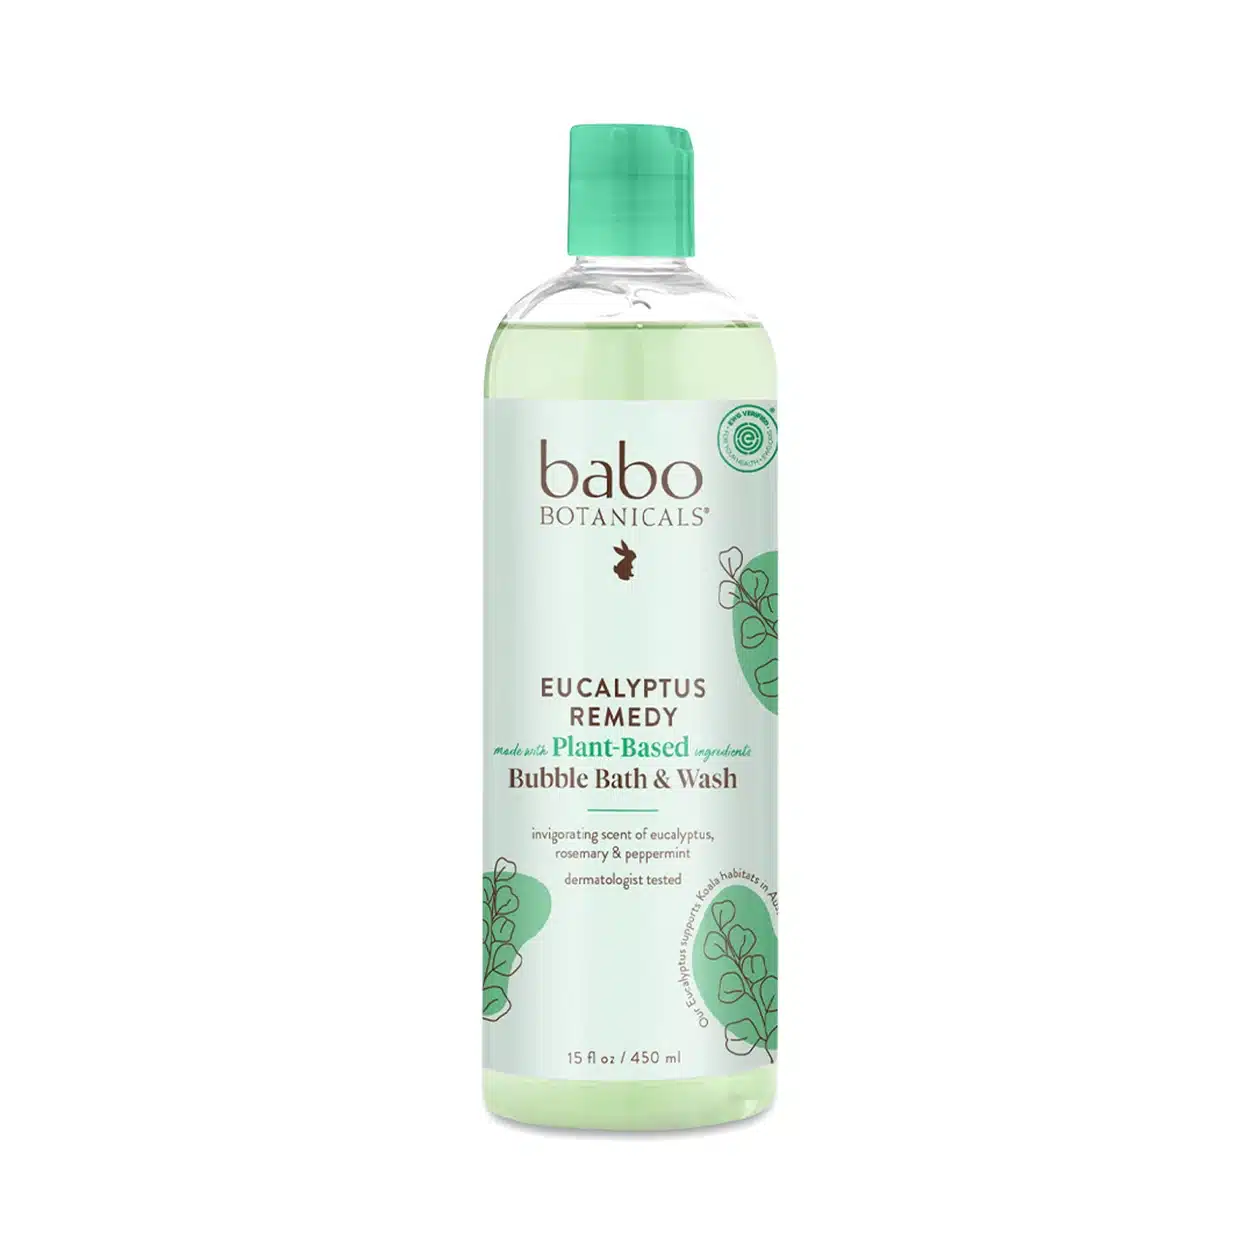 Babo botanicals eucalyptus remedy bubble bath and wash from gimme the good stuff